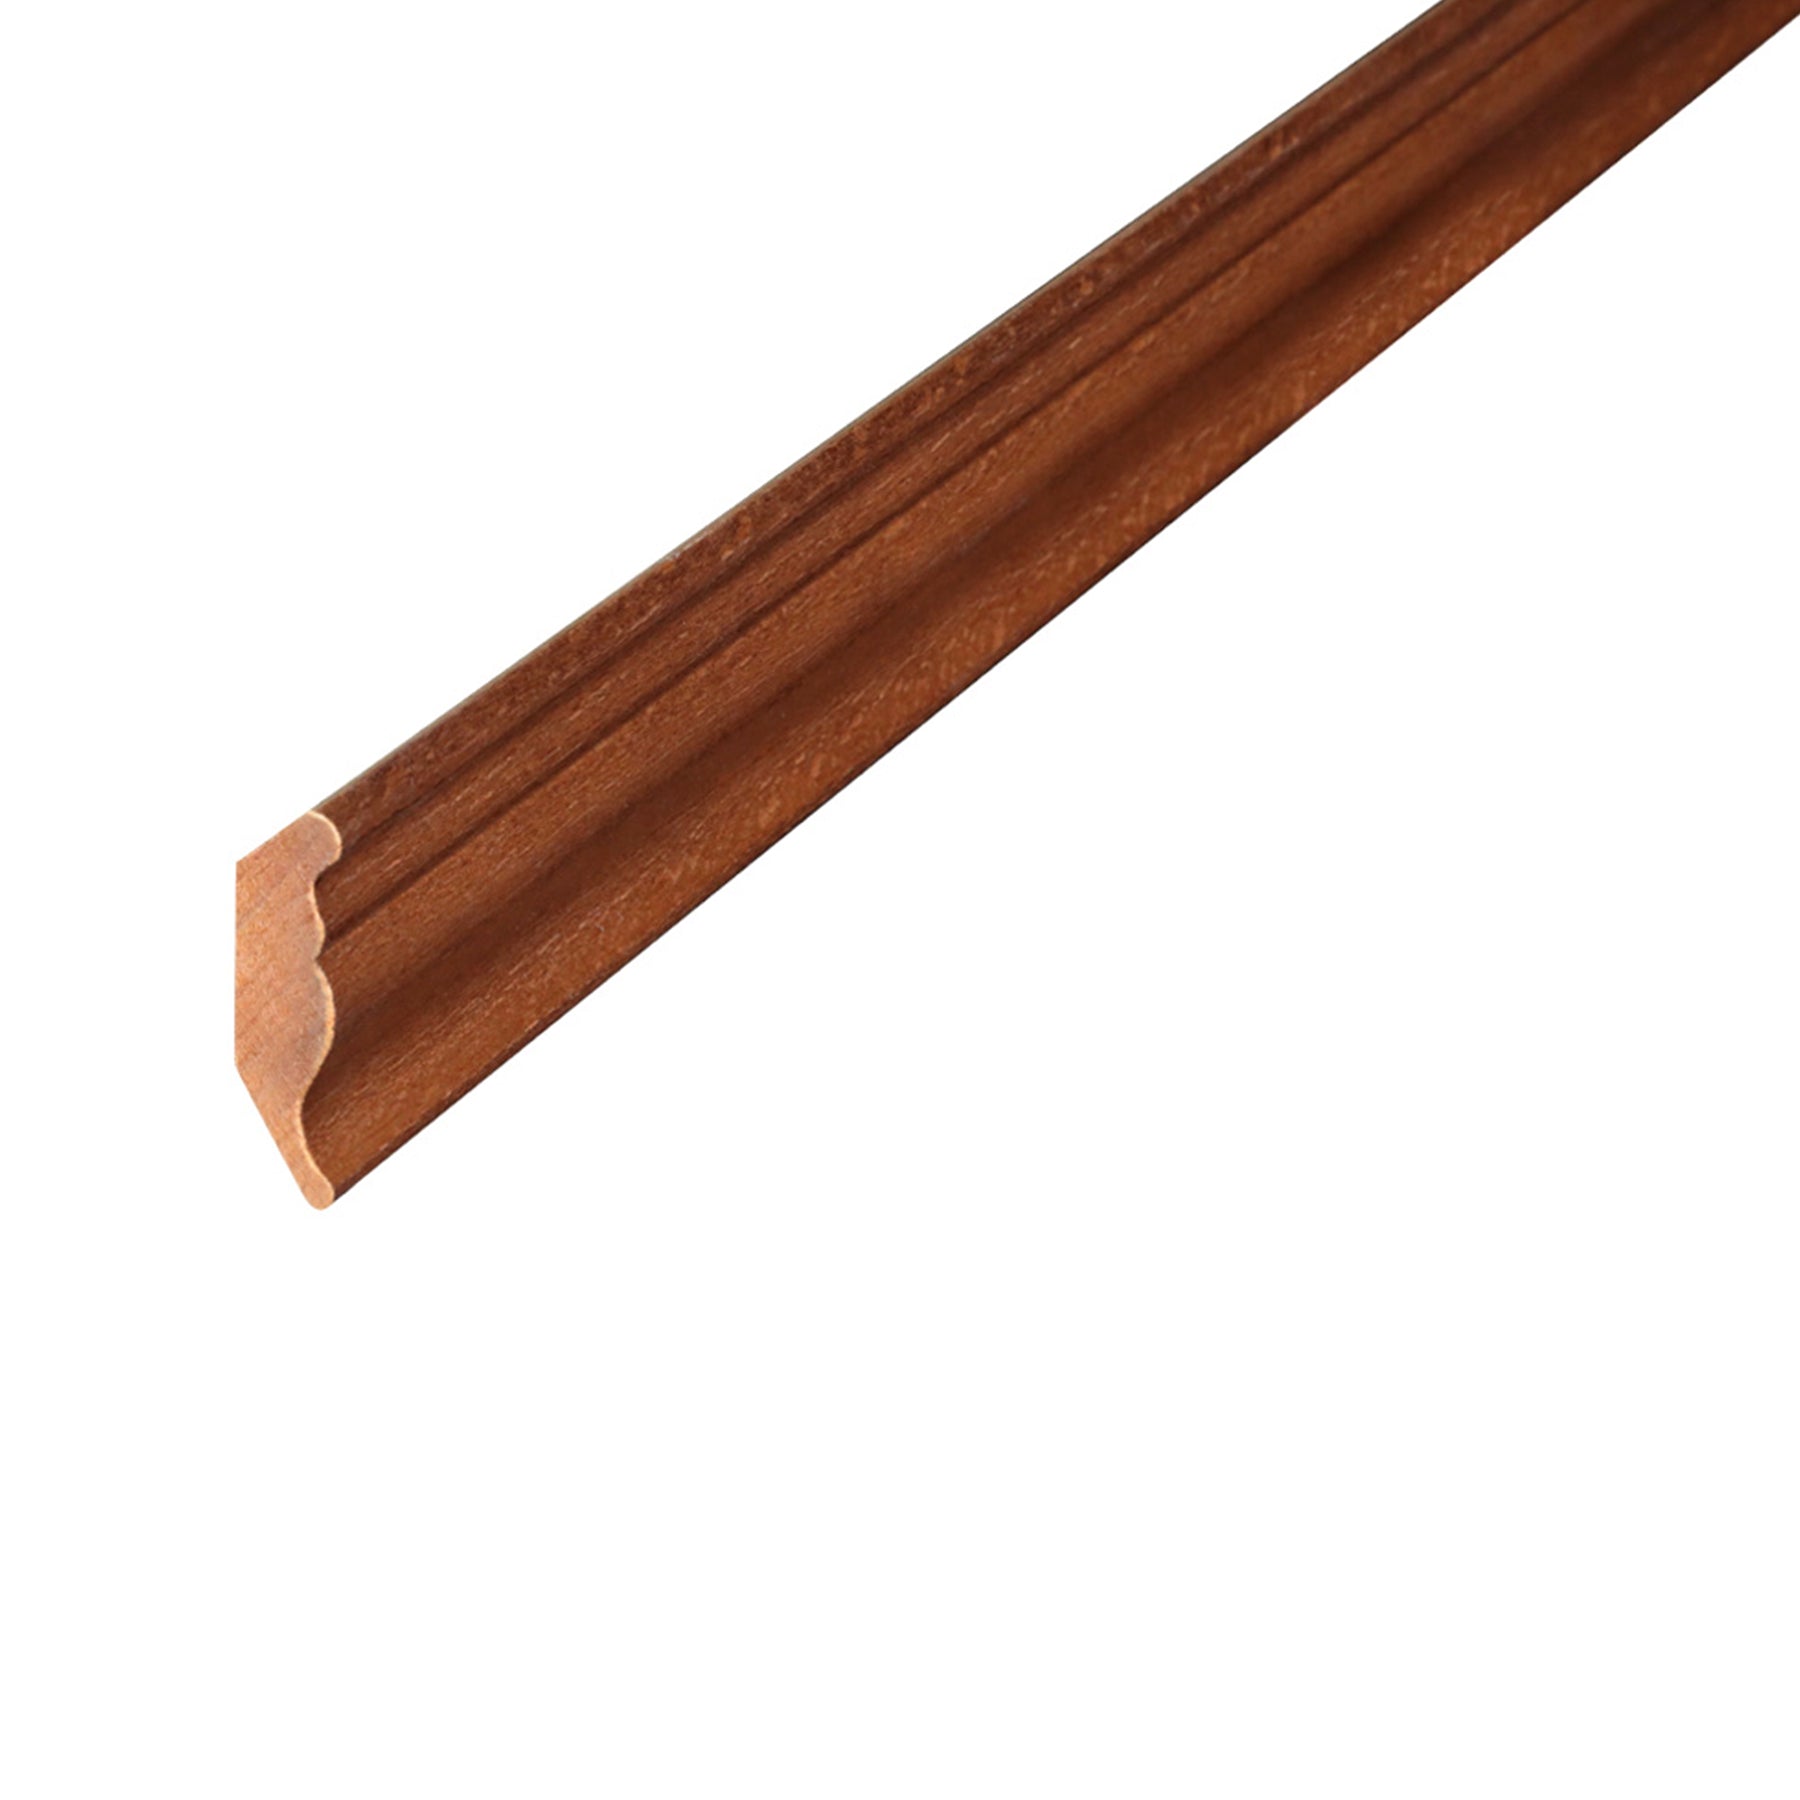 Small Crown Molding - 1-3/16 Inch x 1-3/16 Inch x 96 Inch - Glenwood Shaker - Kitchen Cabinet